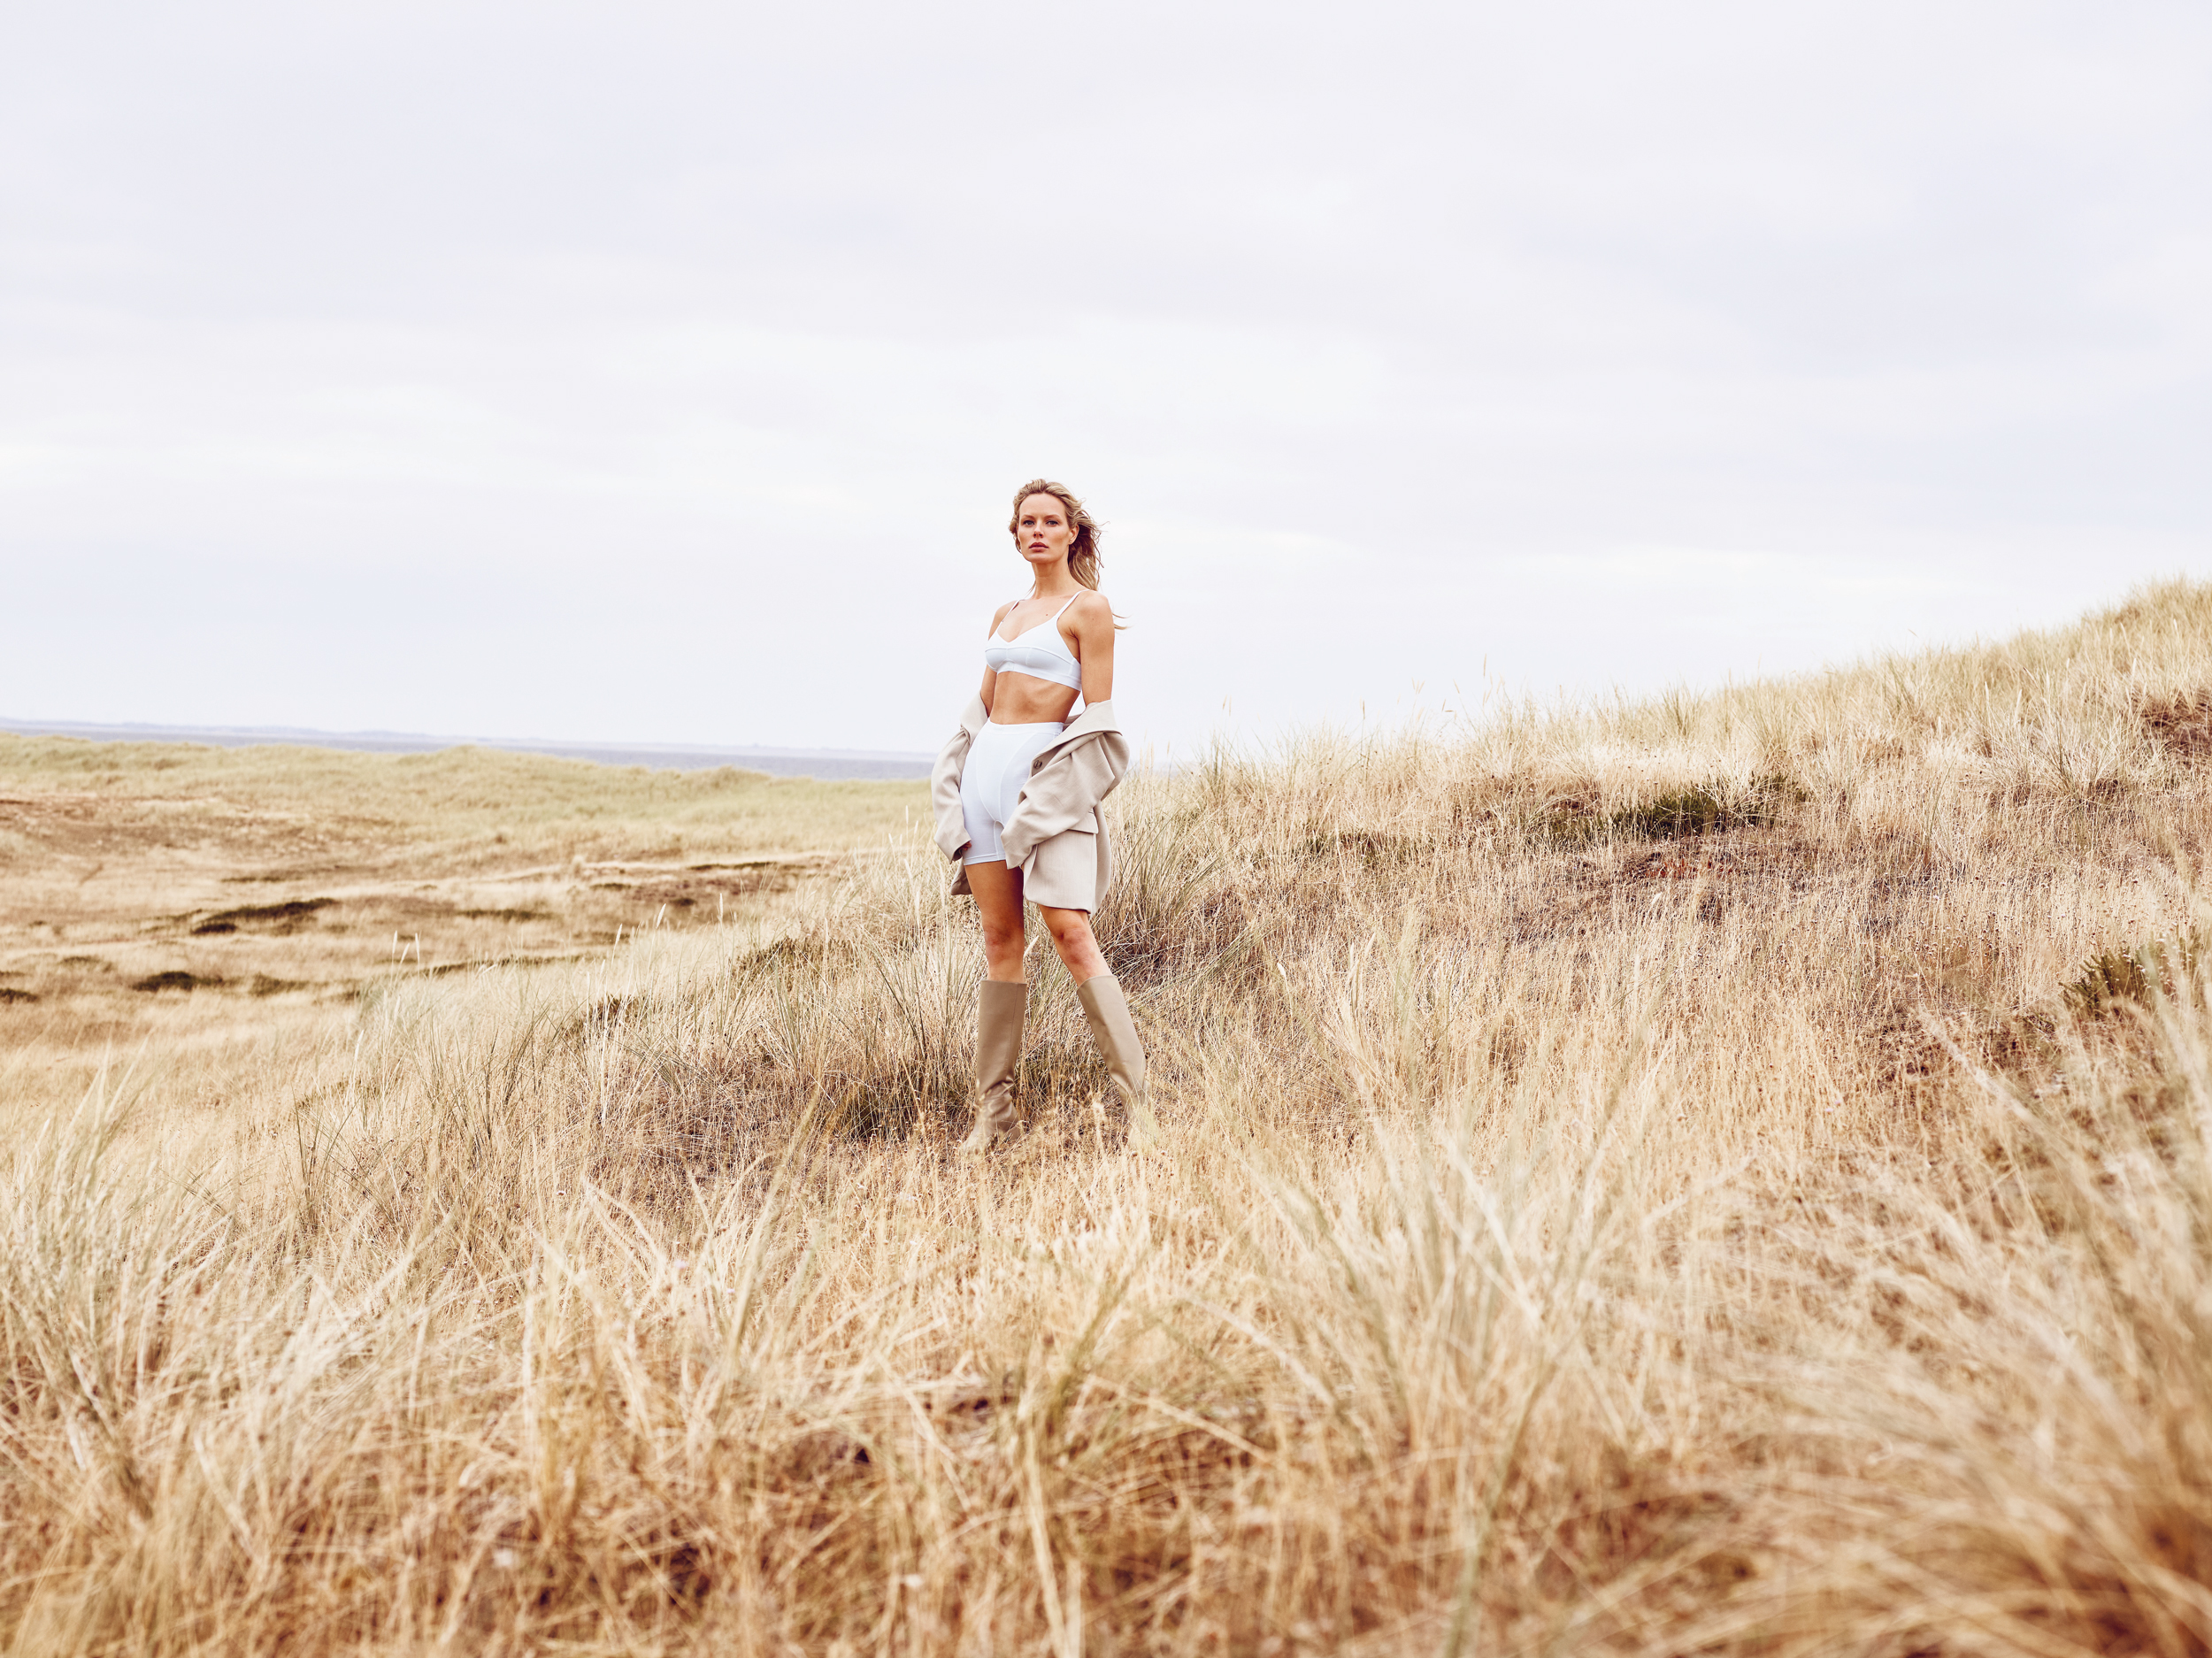 Photo and Video Production for the Speidel Lingerie on Sylt, Germany